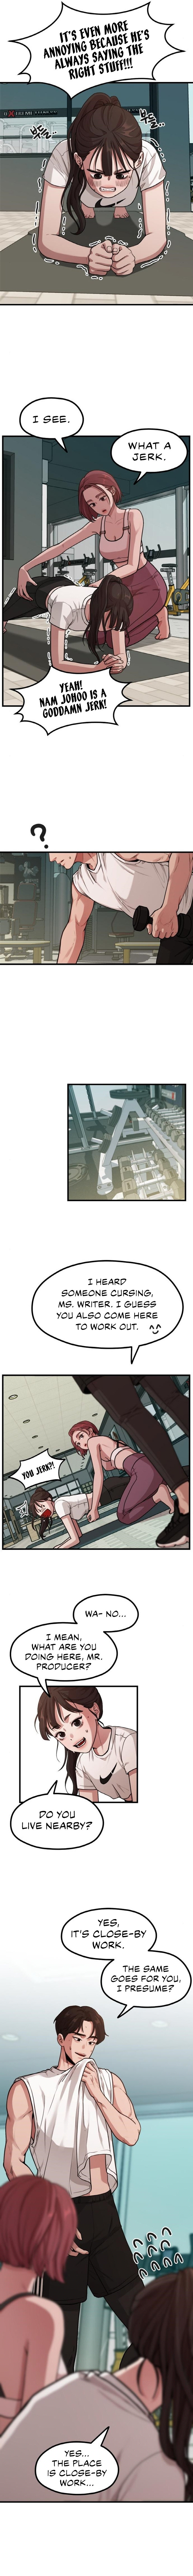 Writer Sung’s Life - Chapter 2 Page 9